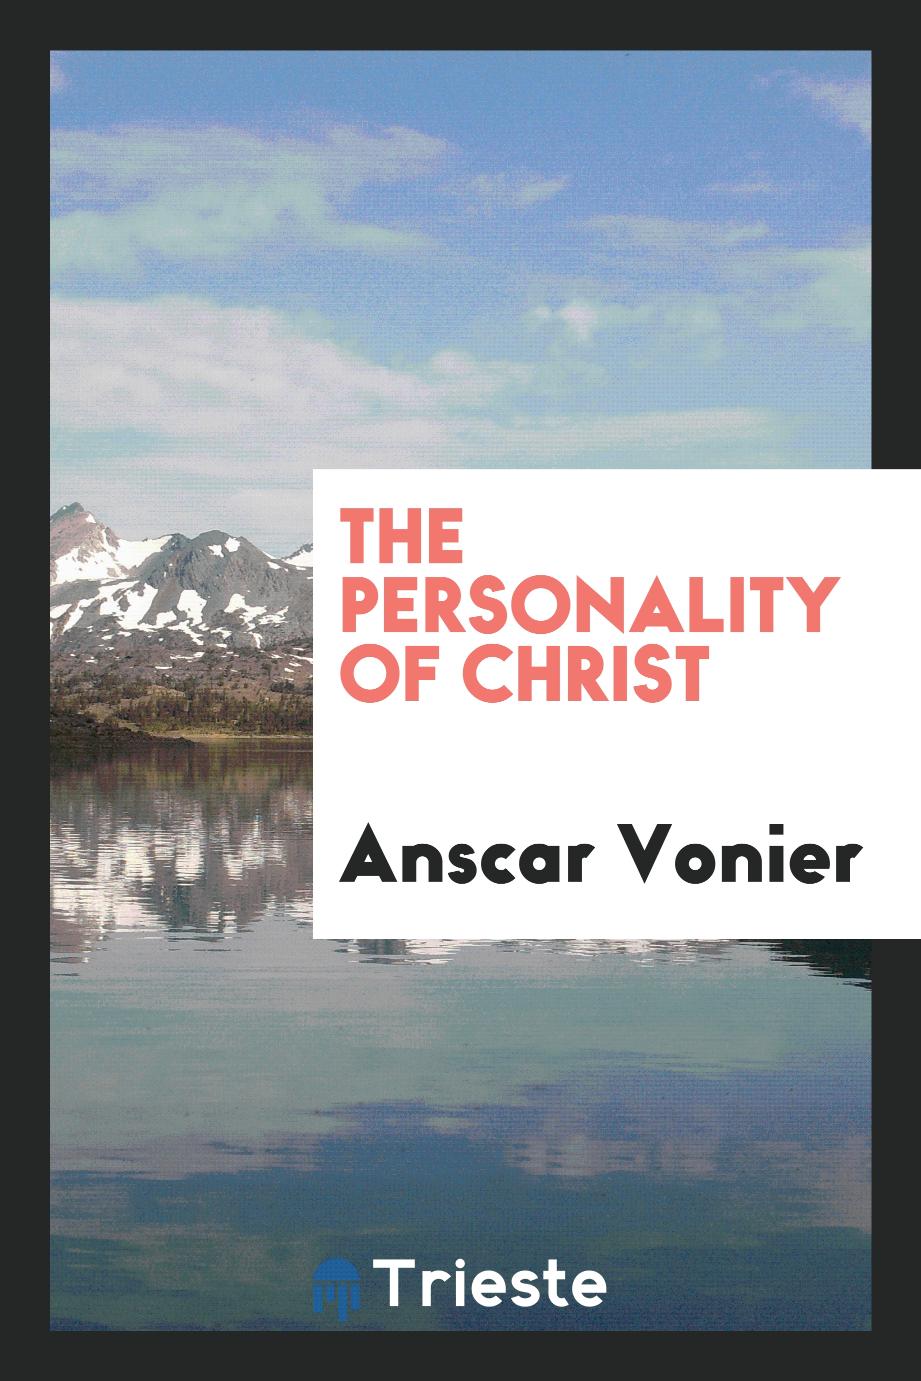 The personality of Christ